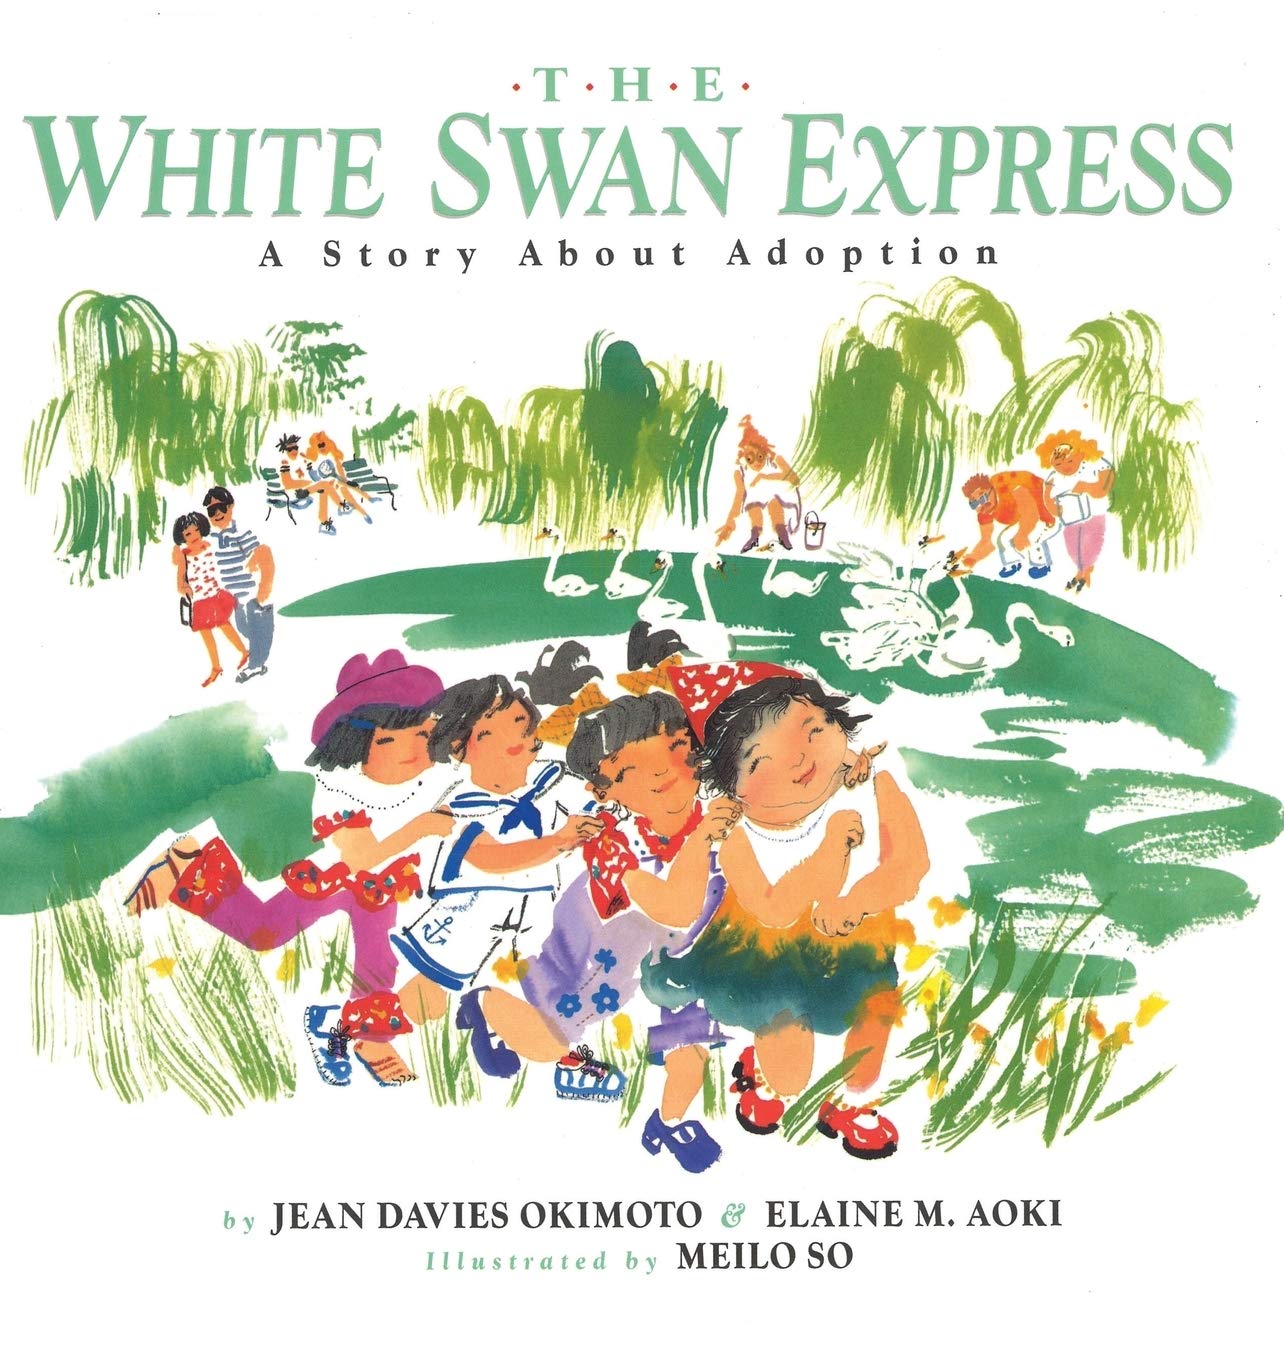 The White Swan Express: A story about adoption